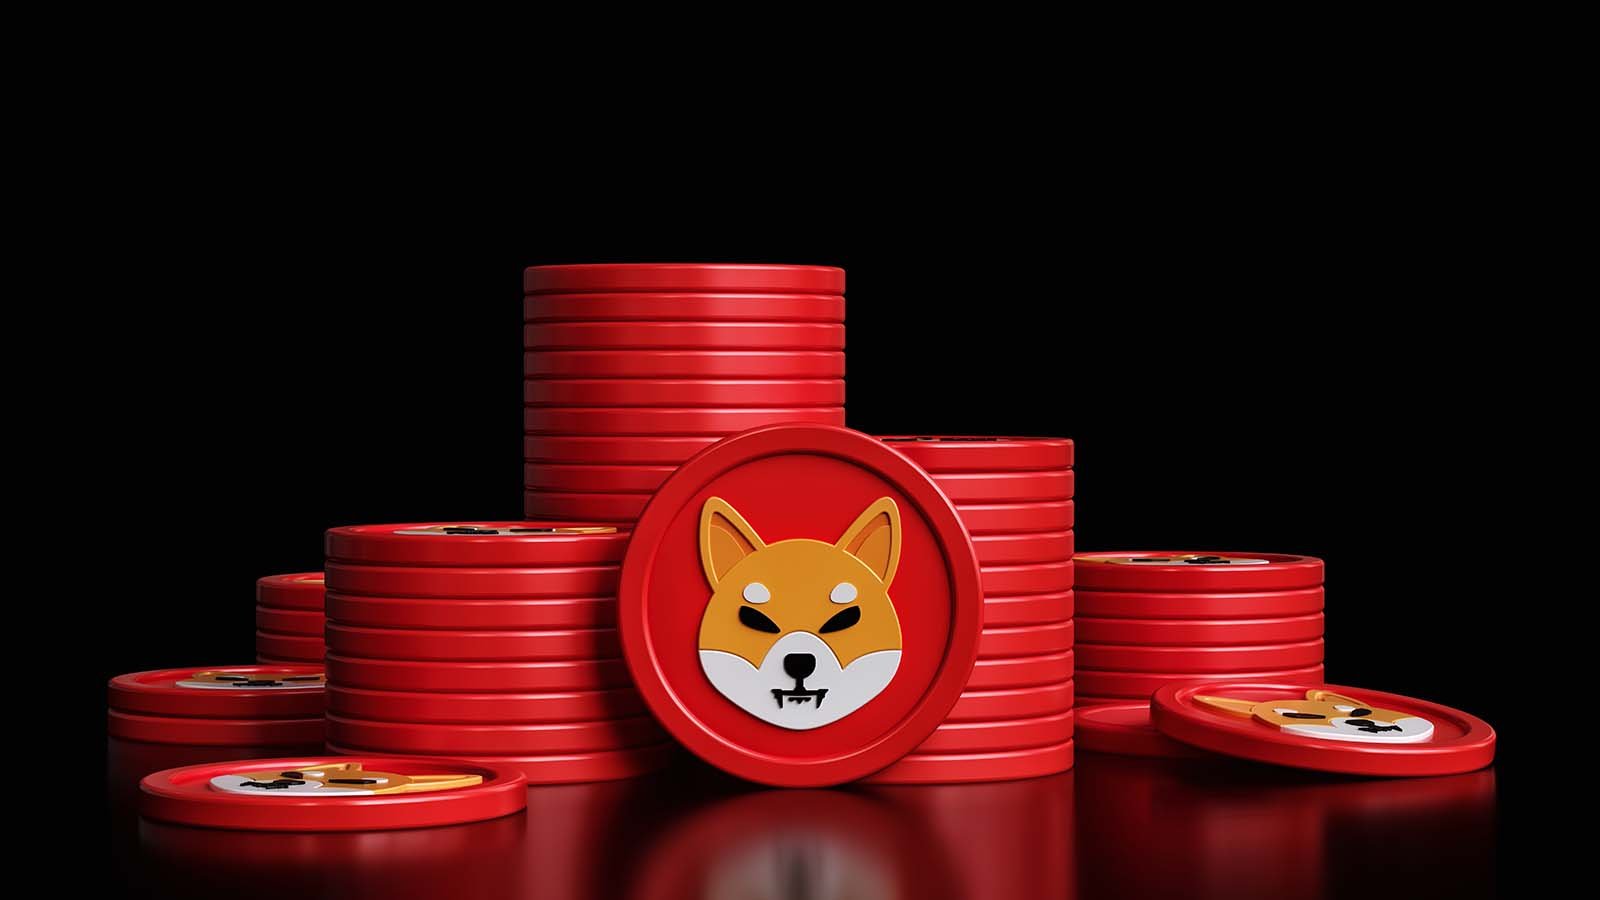 Concept red tokens for the Shiba Inu (SHIB) cryptocurrency.